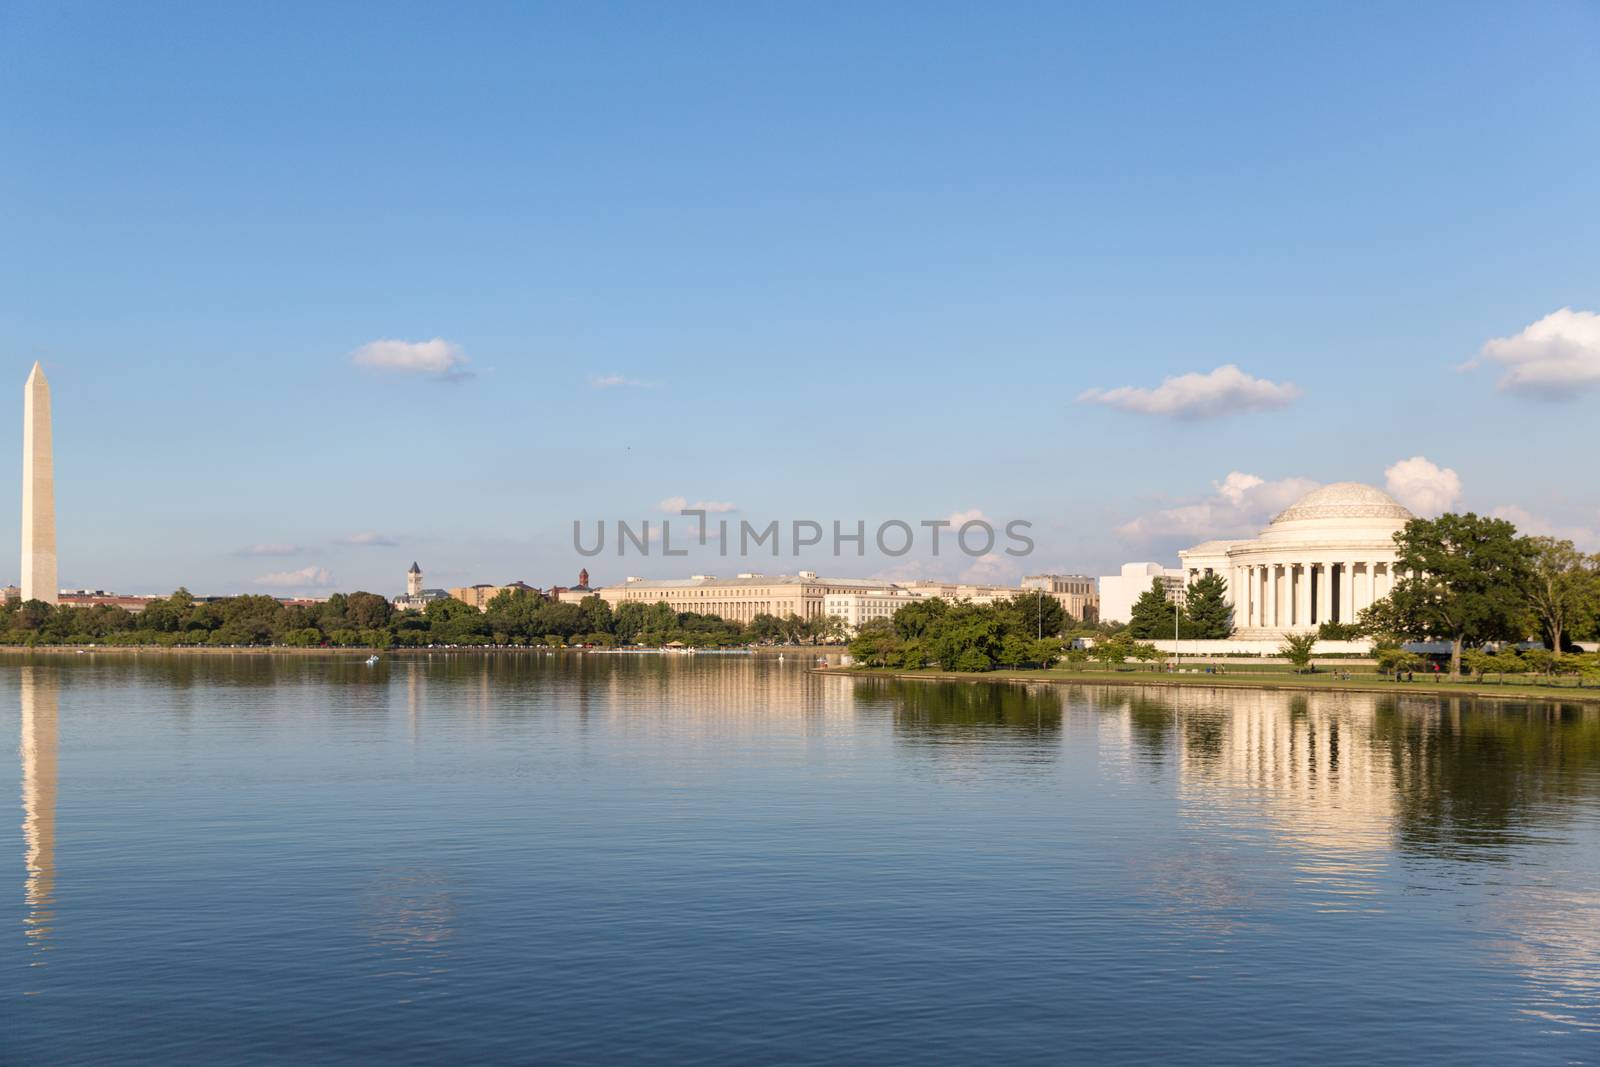 The monument and Thomas Jeffersen Memorial  by chrisukphoto